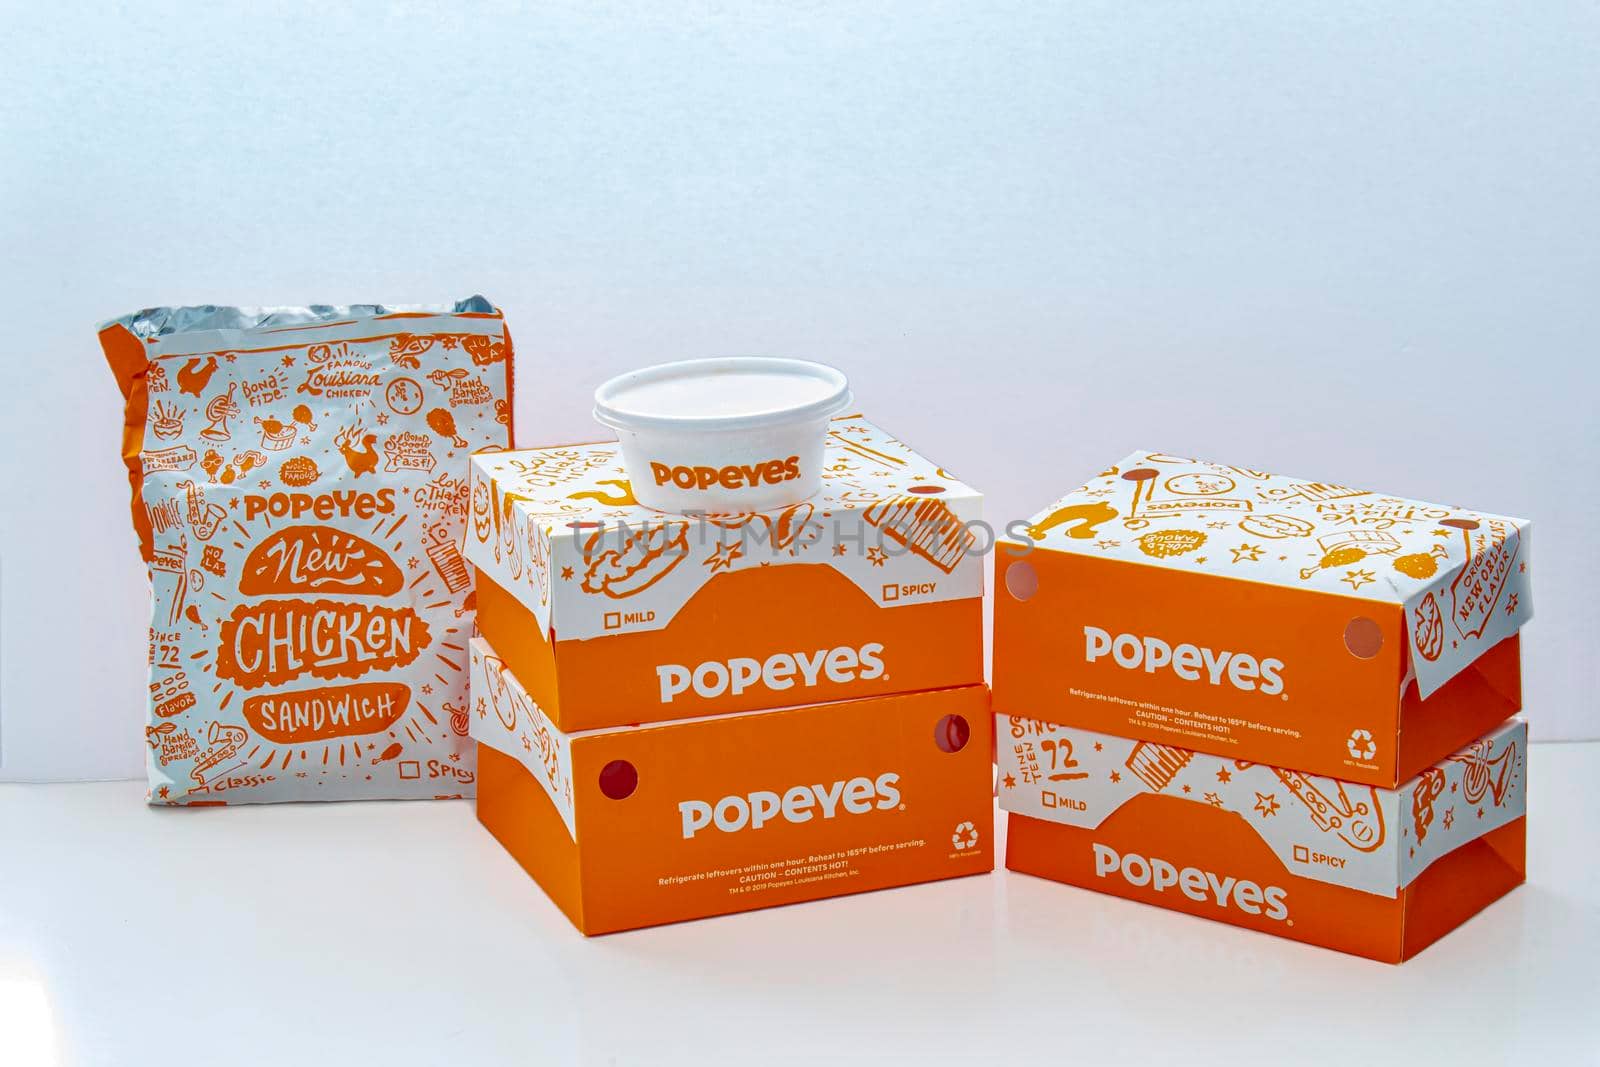 Calgary, Alberta, Canada. Oct 22, 2020. Popeyes boxes of chicken, burgers, cole salad and fries on a white background.